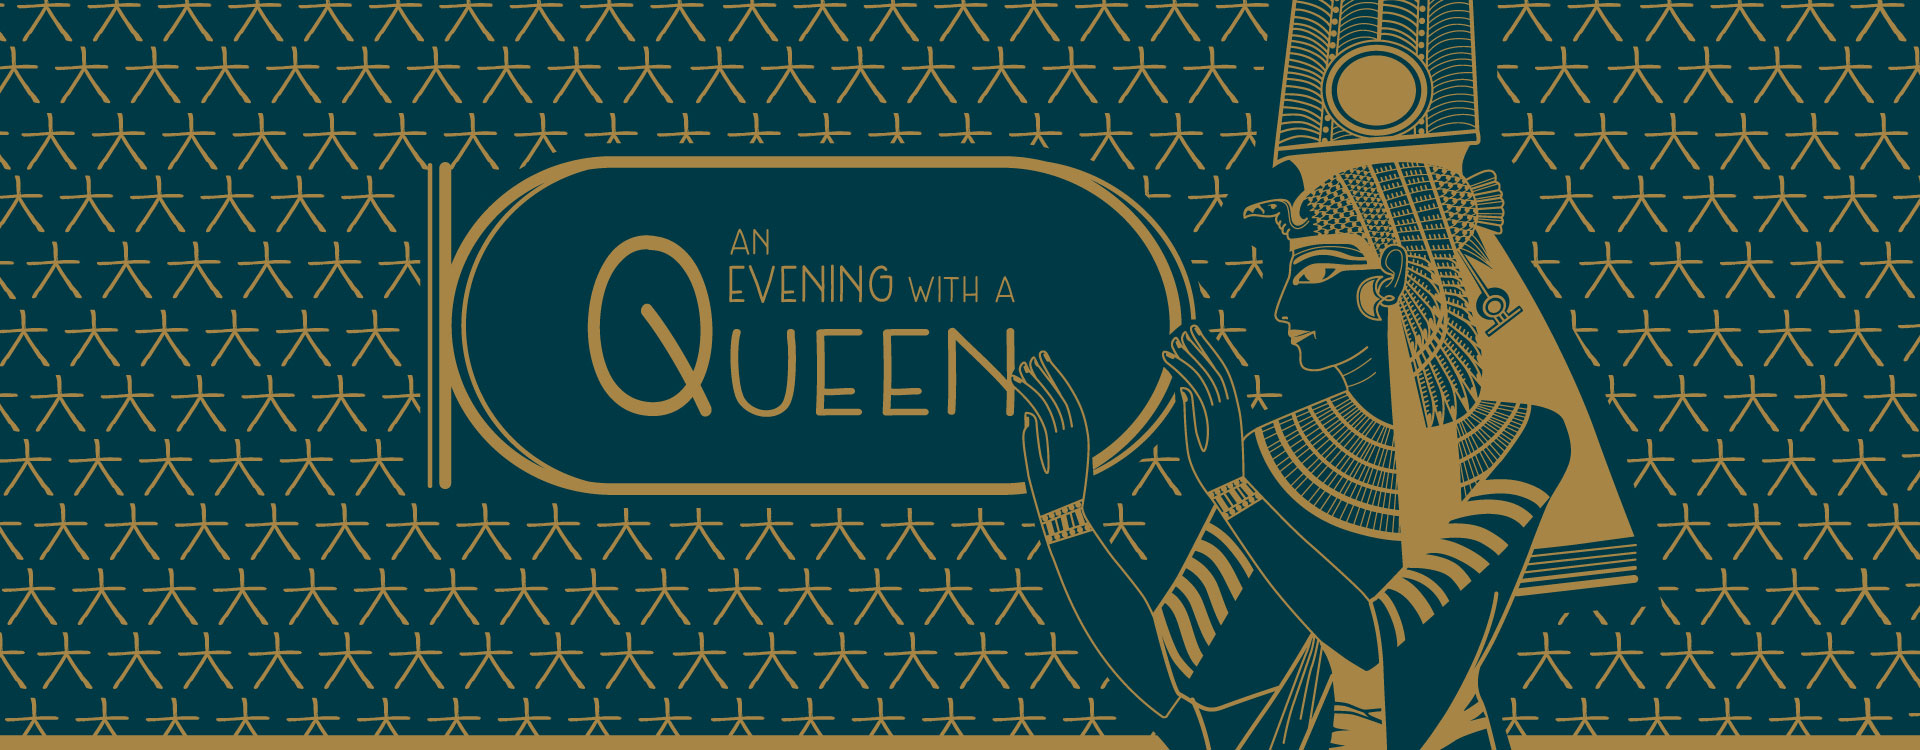 An Evening With a Queen-Gala Invitation